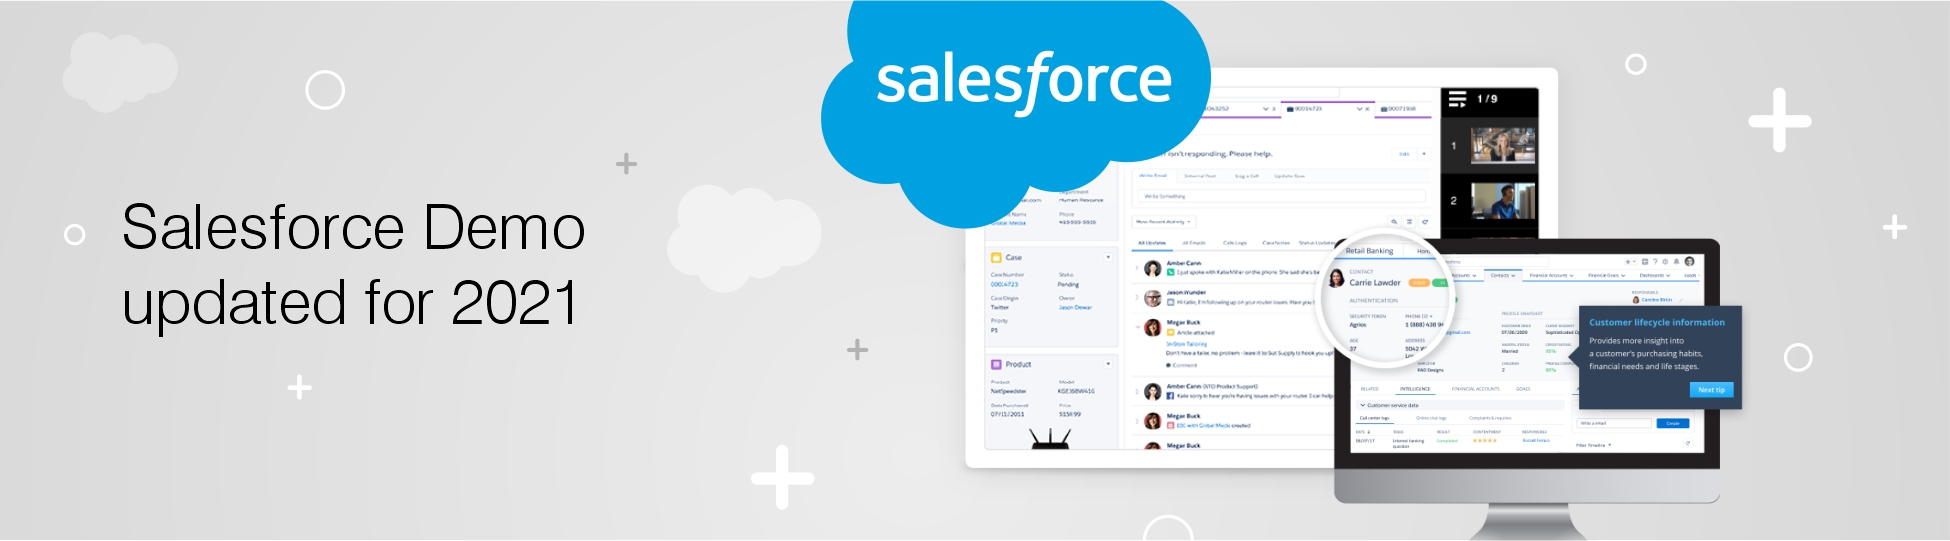 Salesforce-Demo-updated-for-2021